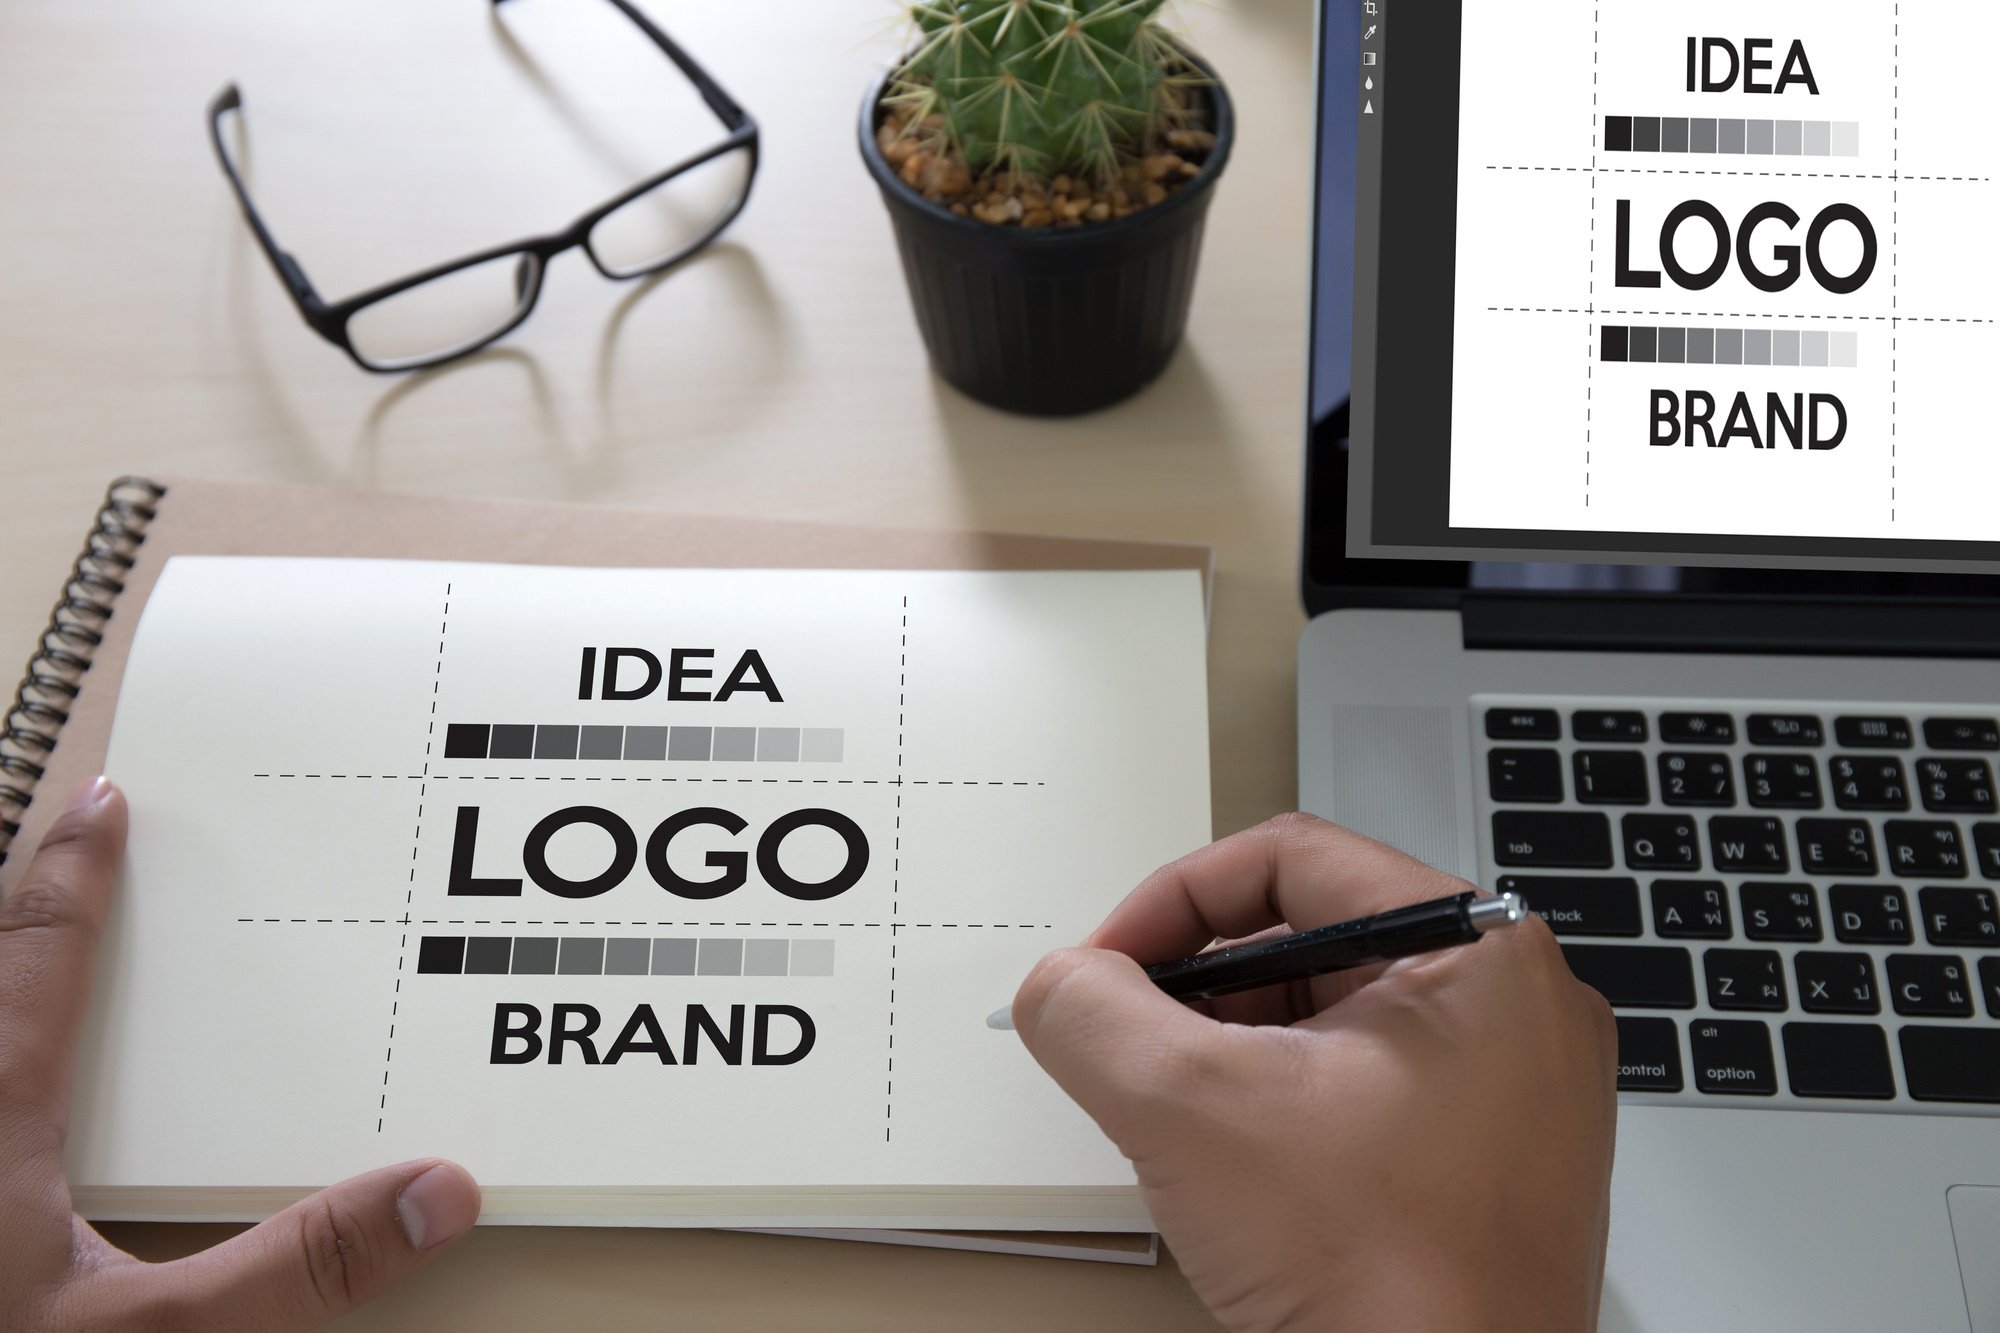 Creating a logo: step by step